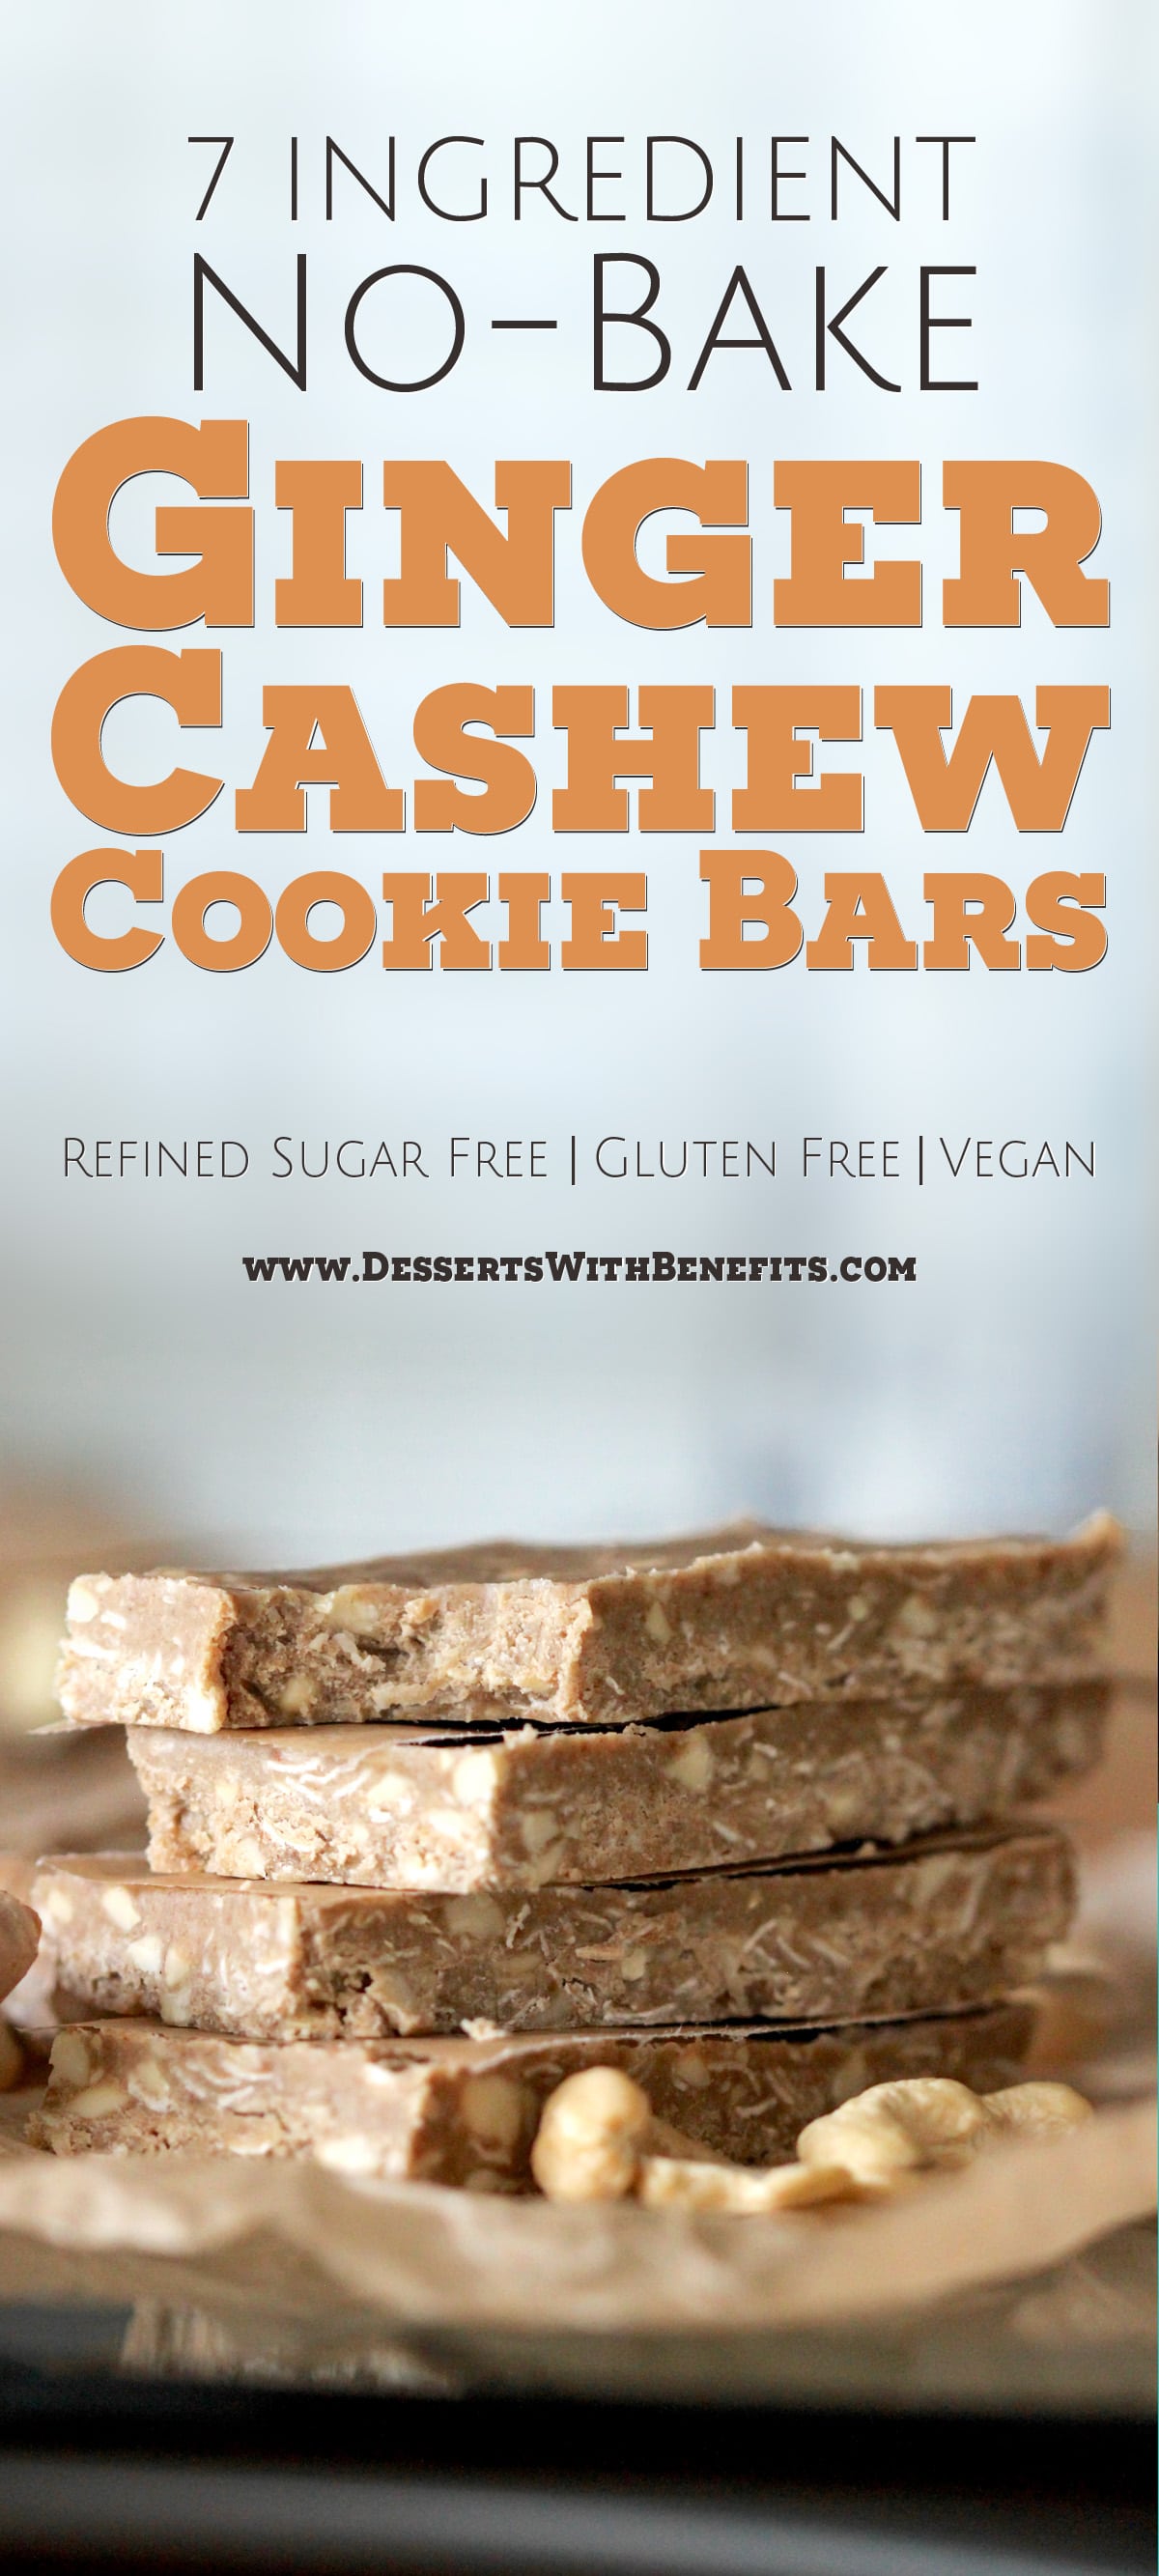 Love granola bars but think it’s too hot out to turn on the oven? Make these Healthy NO-BAKE Ginger Cashew Cookie Bars! They’re chewy like energy bars, hearty like granola bars, and sweet like cookies! Made with just seven ingredients, including oats, cashews, coconut oil, pure maple syrup, and ginger, these bars will satisfy your sweet tooth and your hunger pangs. -- Healthy Dessert Recipes with sugar free, low calorie, low fat, high protein, gluten free, dairy free, vegan, and raw options at the Desserts With Benefits Blog (www.DessertsWithBenefits.com)